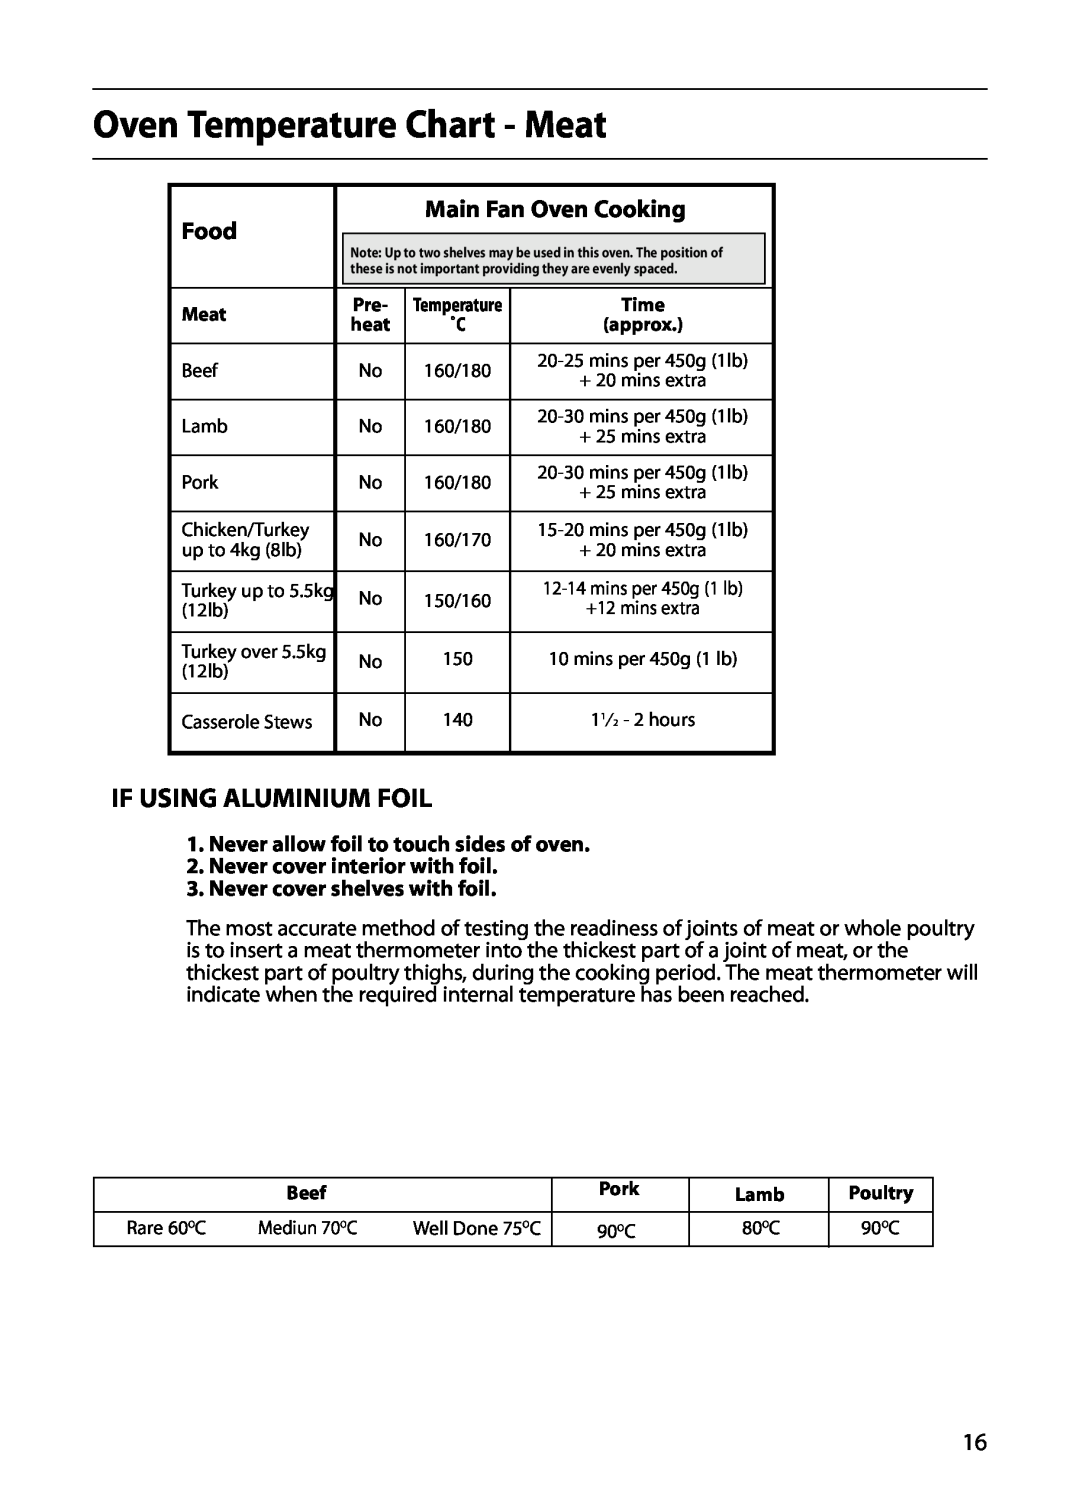 Hotpoint S220E manual Oven Temperature Chart - Meat, If Using Aluminium Foil, Food, Main Fan Oven Cooking 